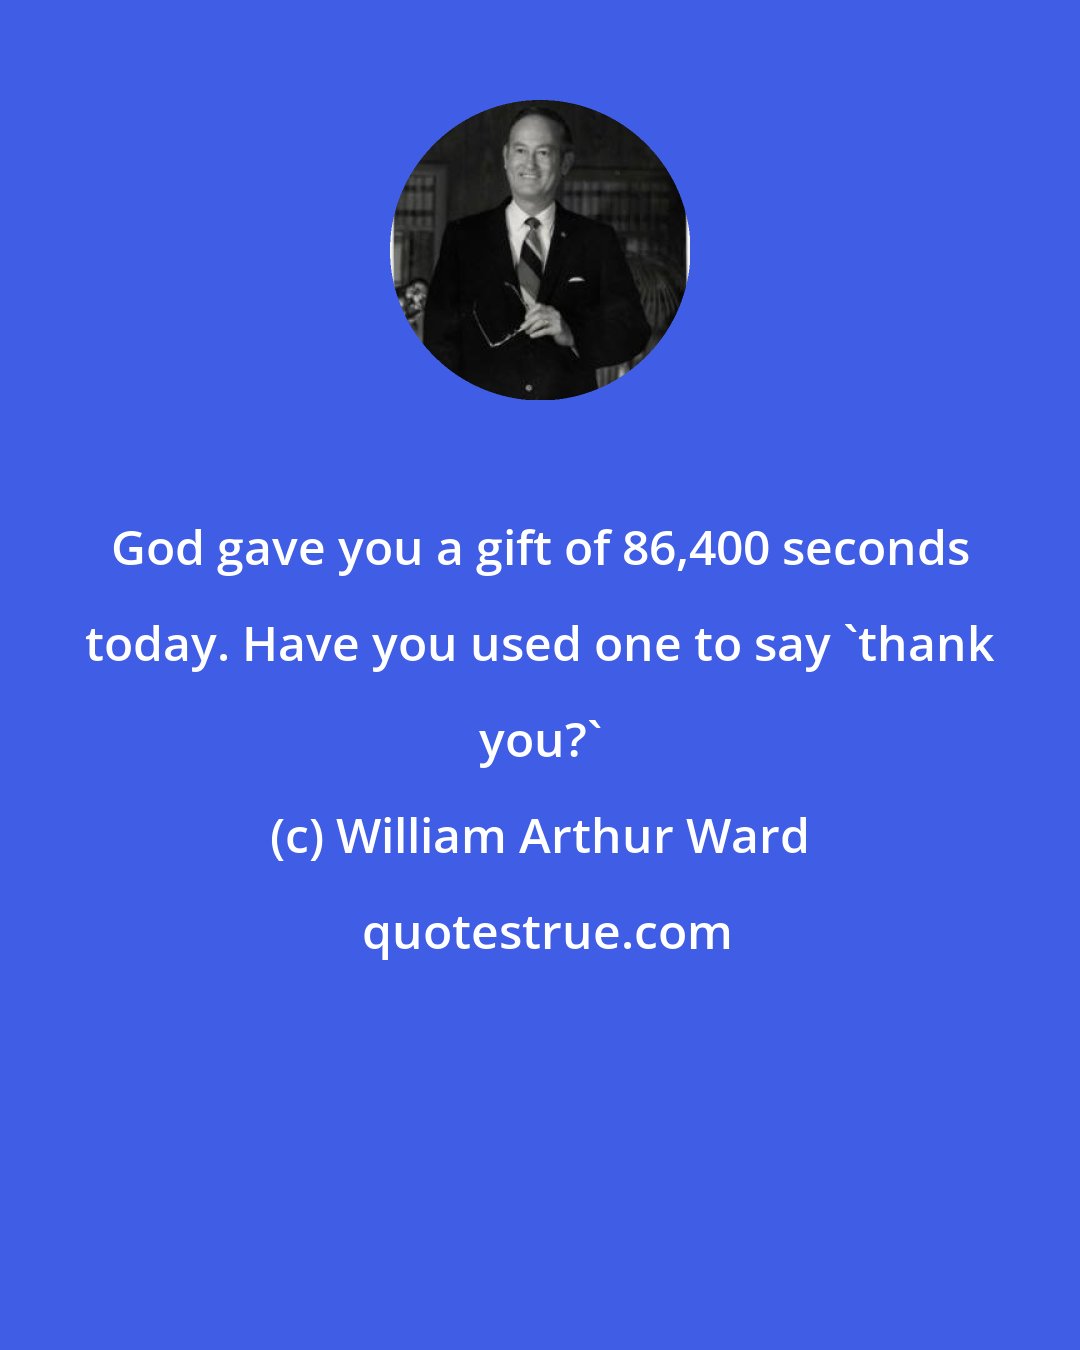 William Arthur Ward: God gave you a gift of 86,400 seconds today. Have you used one to say 'thank you?'